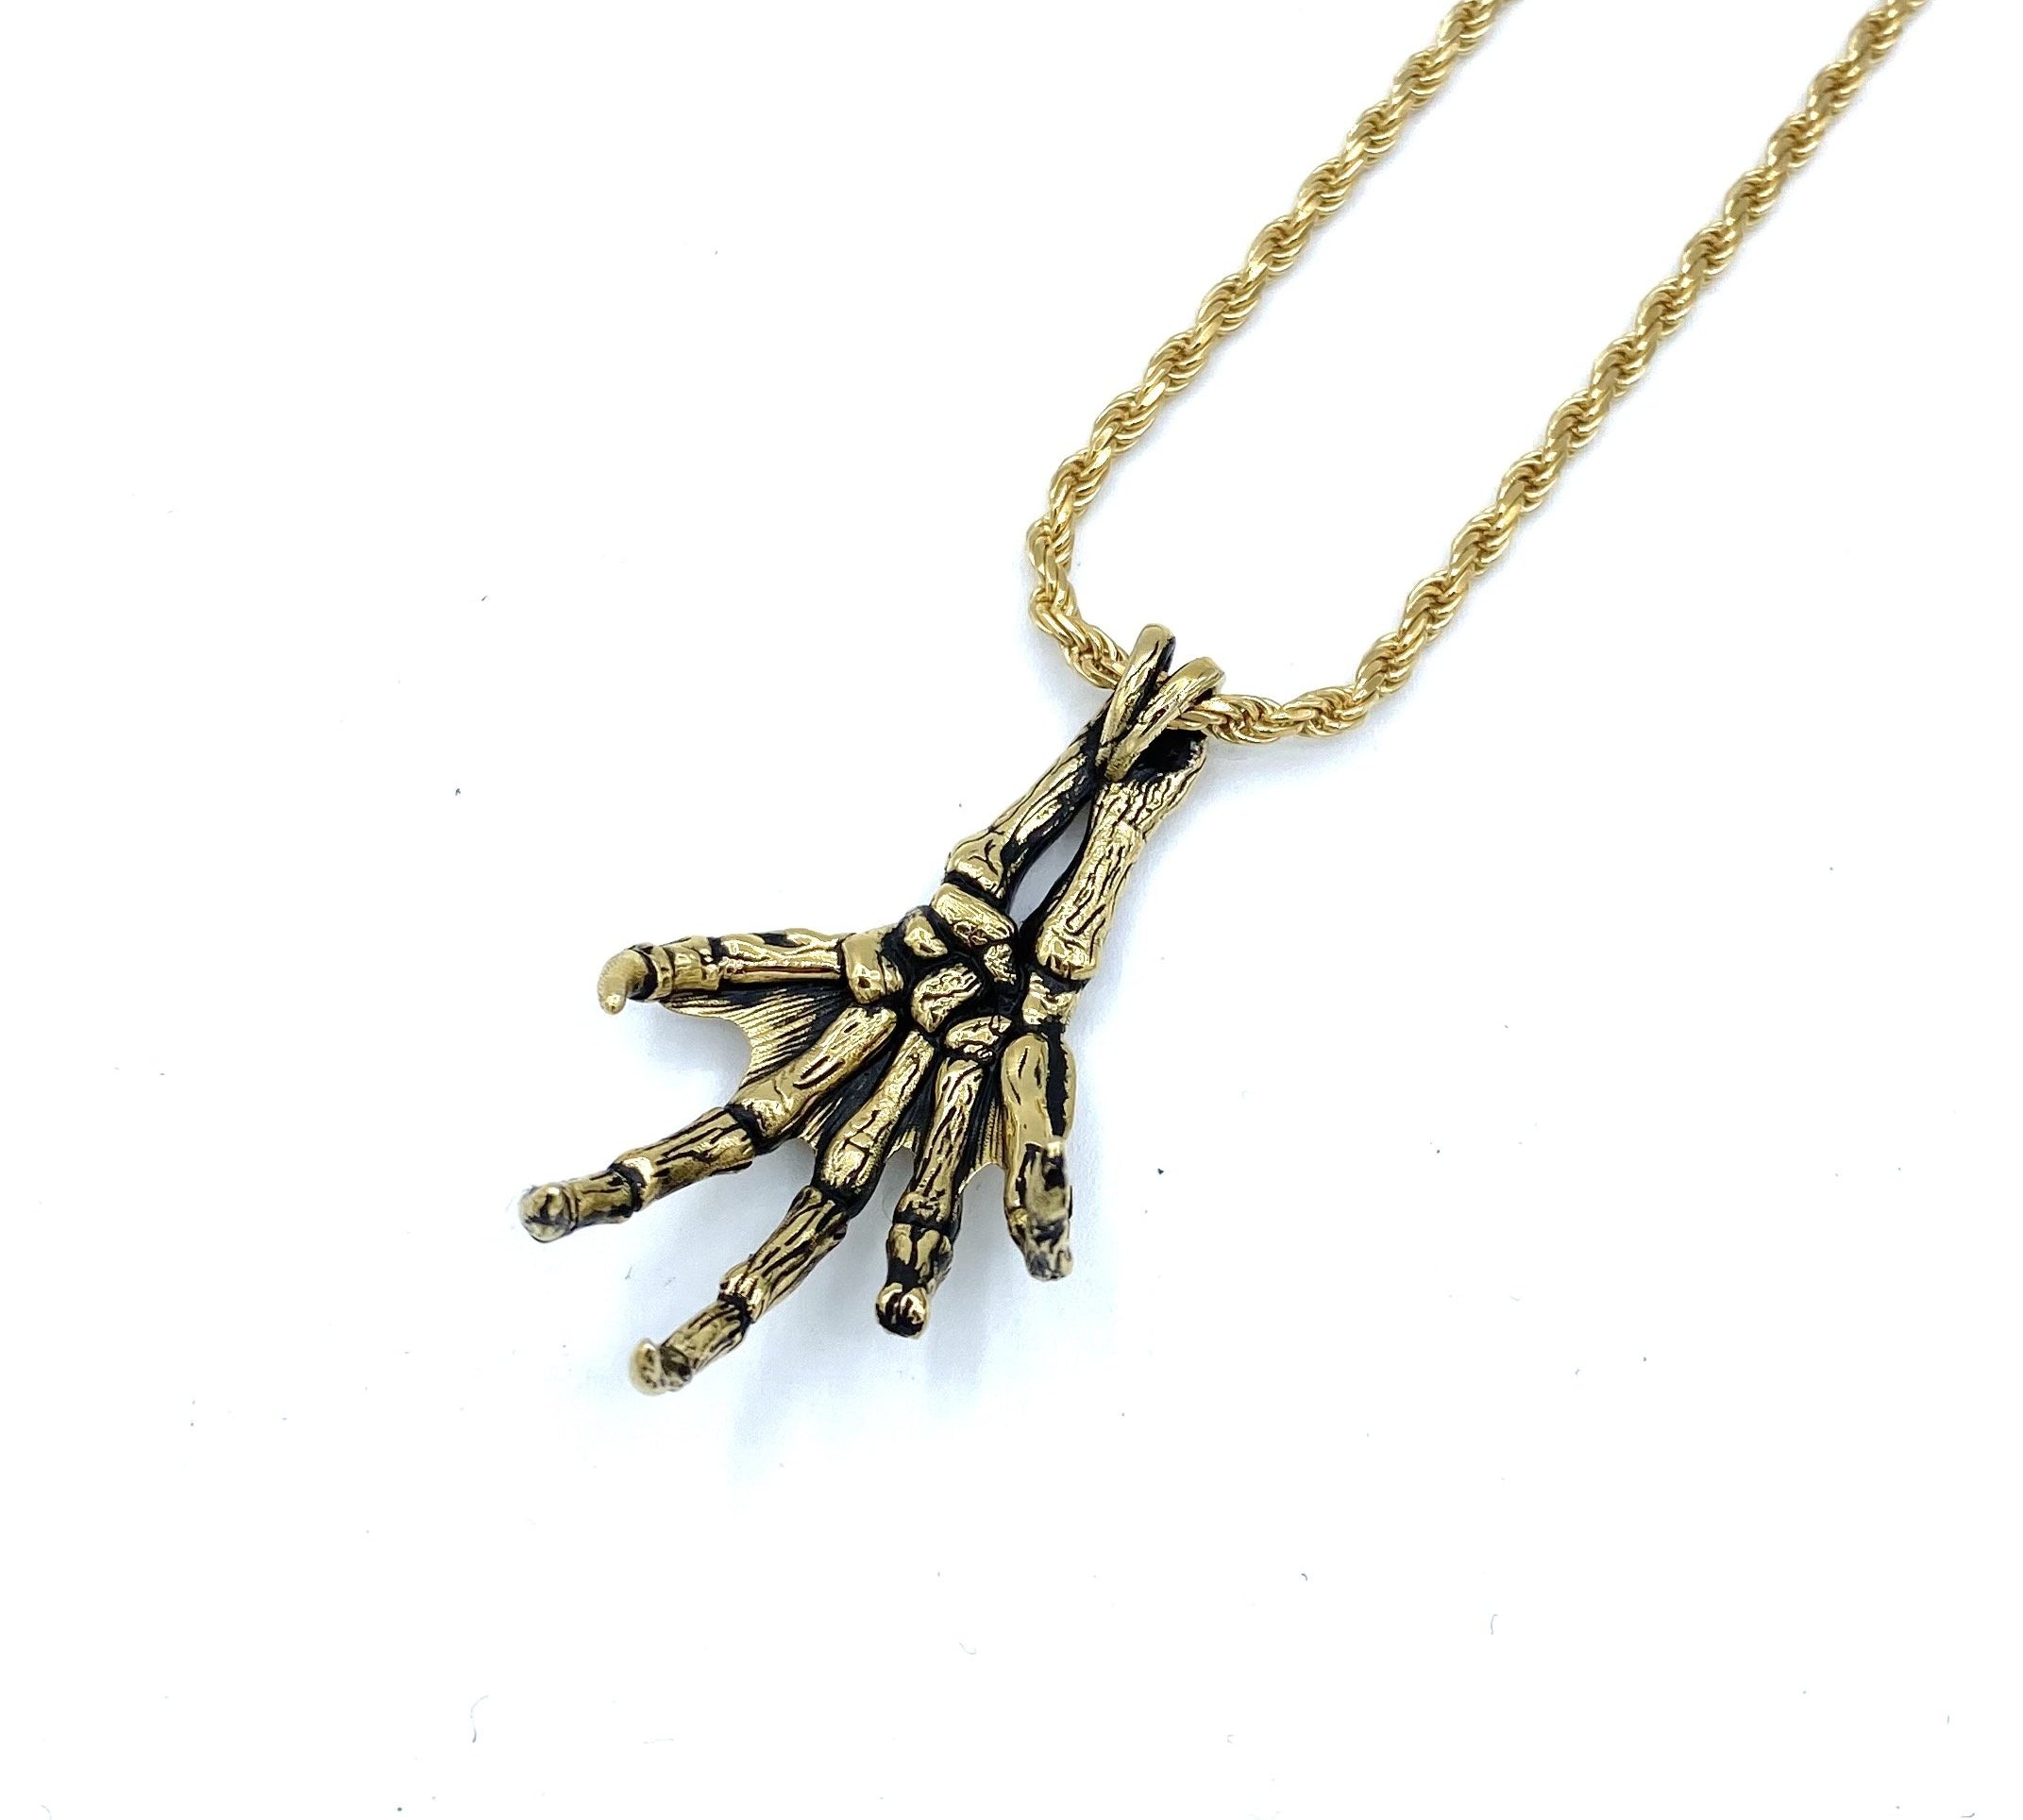 Creature Fossil Hand Necklace pm necklaces Precious Metals Vermeil - 24k Gold Plated 24" 